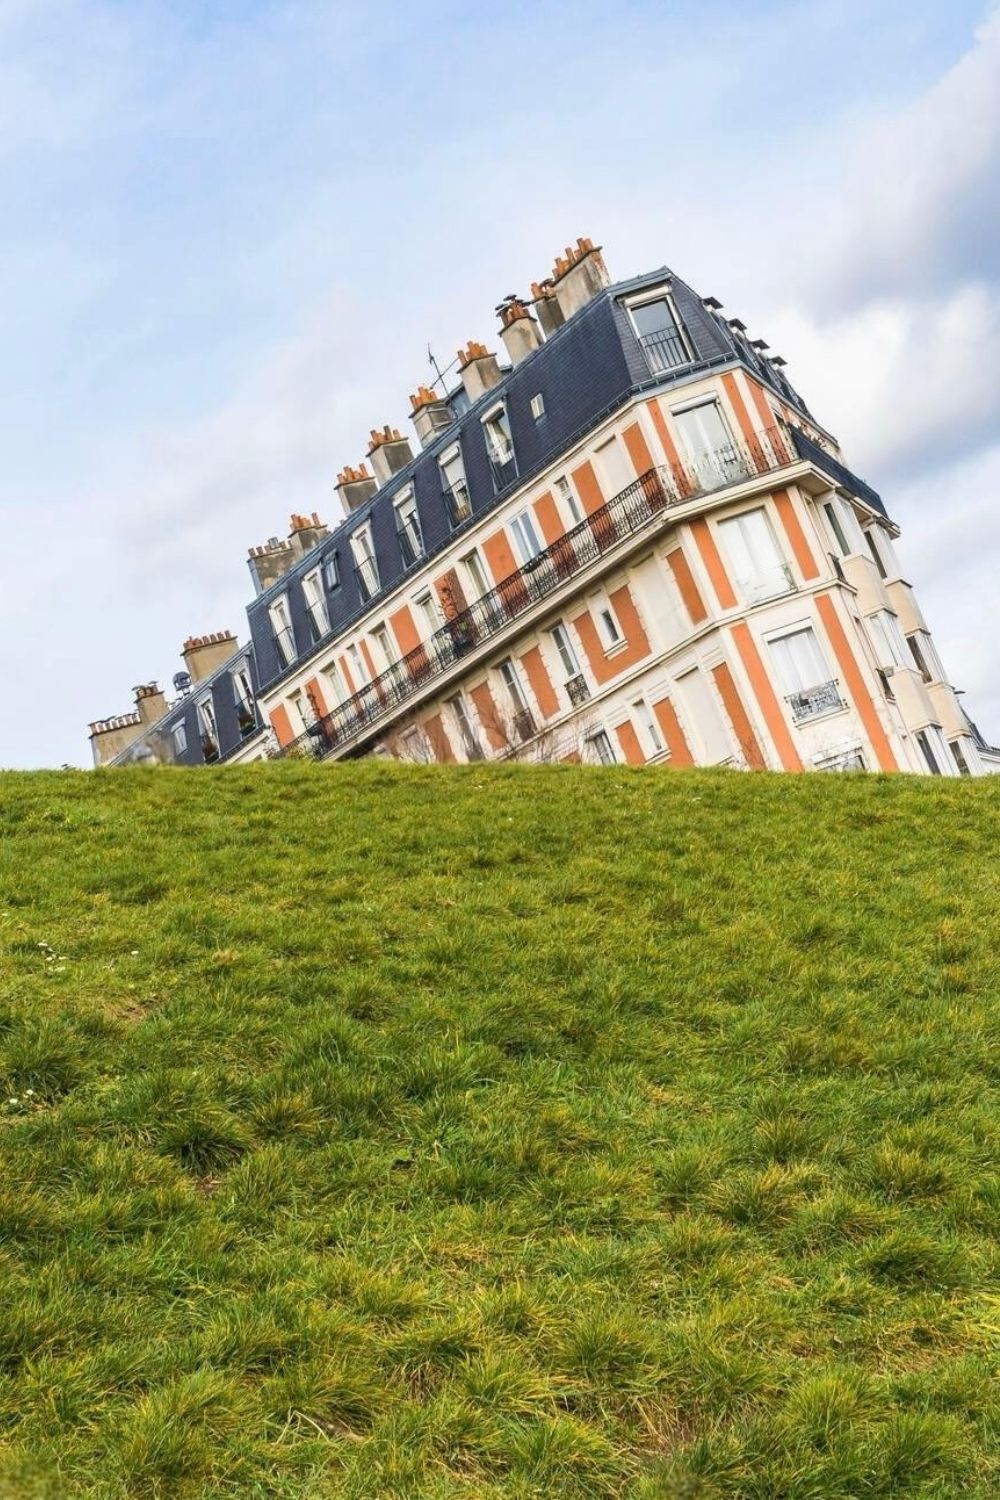 Where to Find the Sinking House in Paris